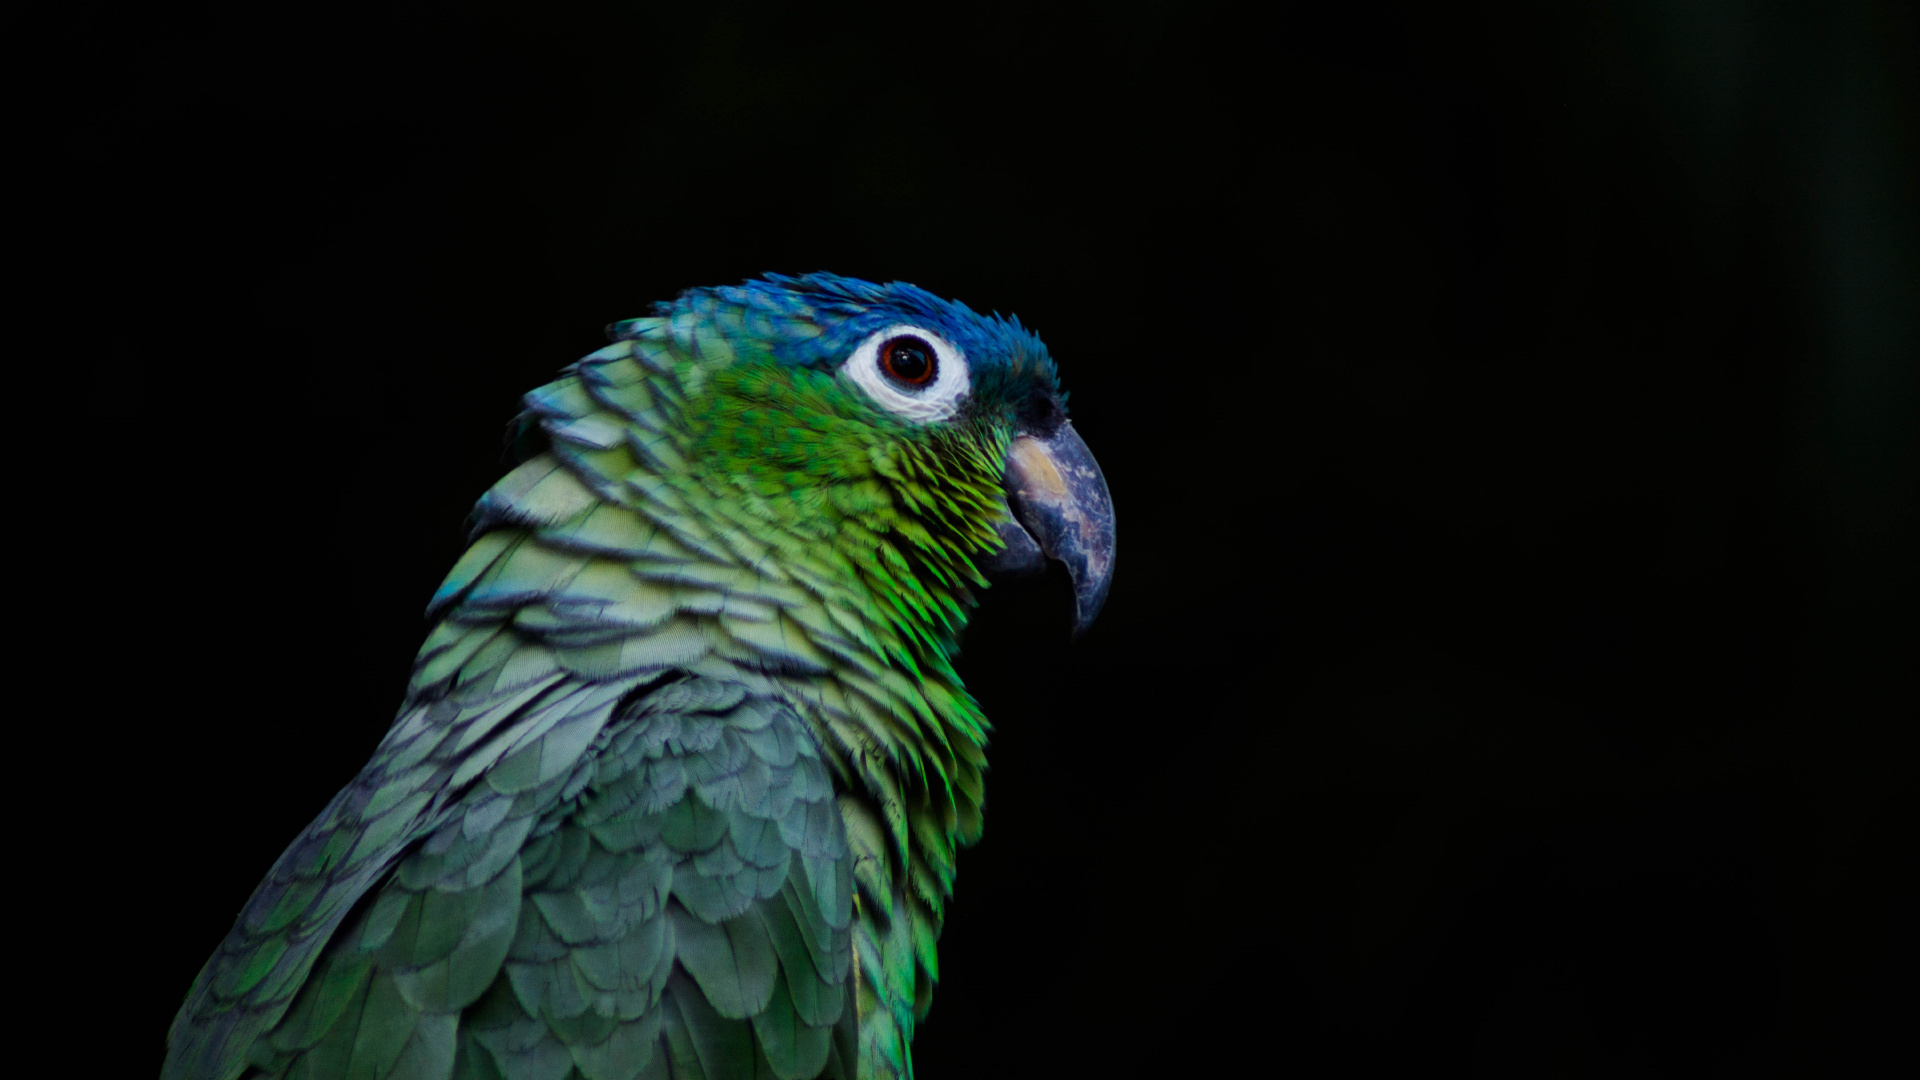 Green and Blue Parrot in Close up Photography. Wallpaper in 1920x1080 Resolution